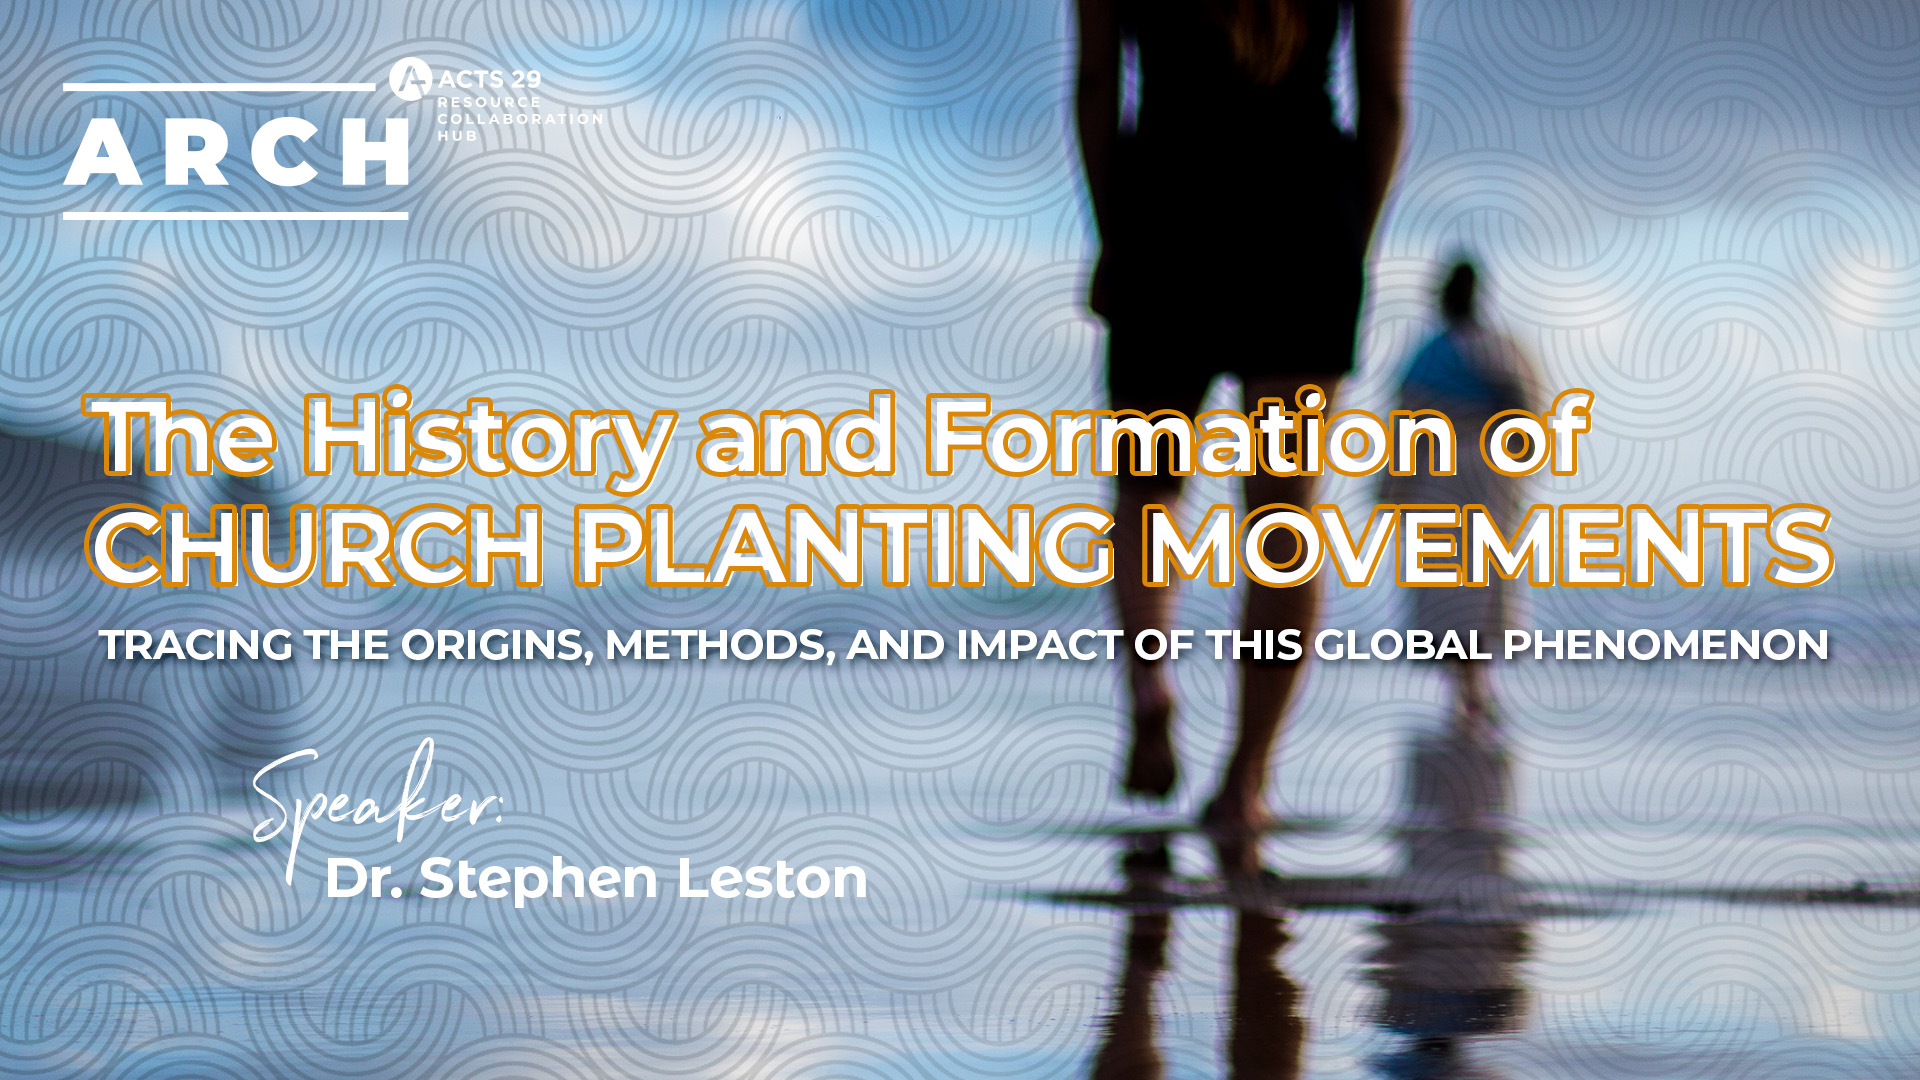 The History and Formation of Church Planting Movements